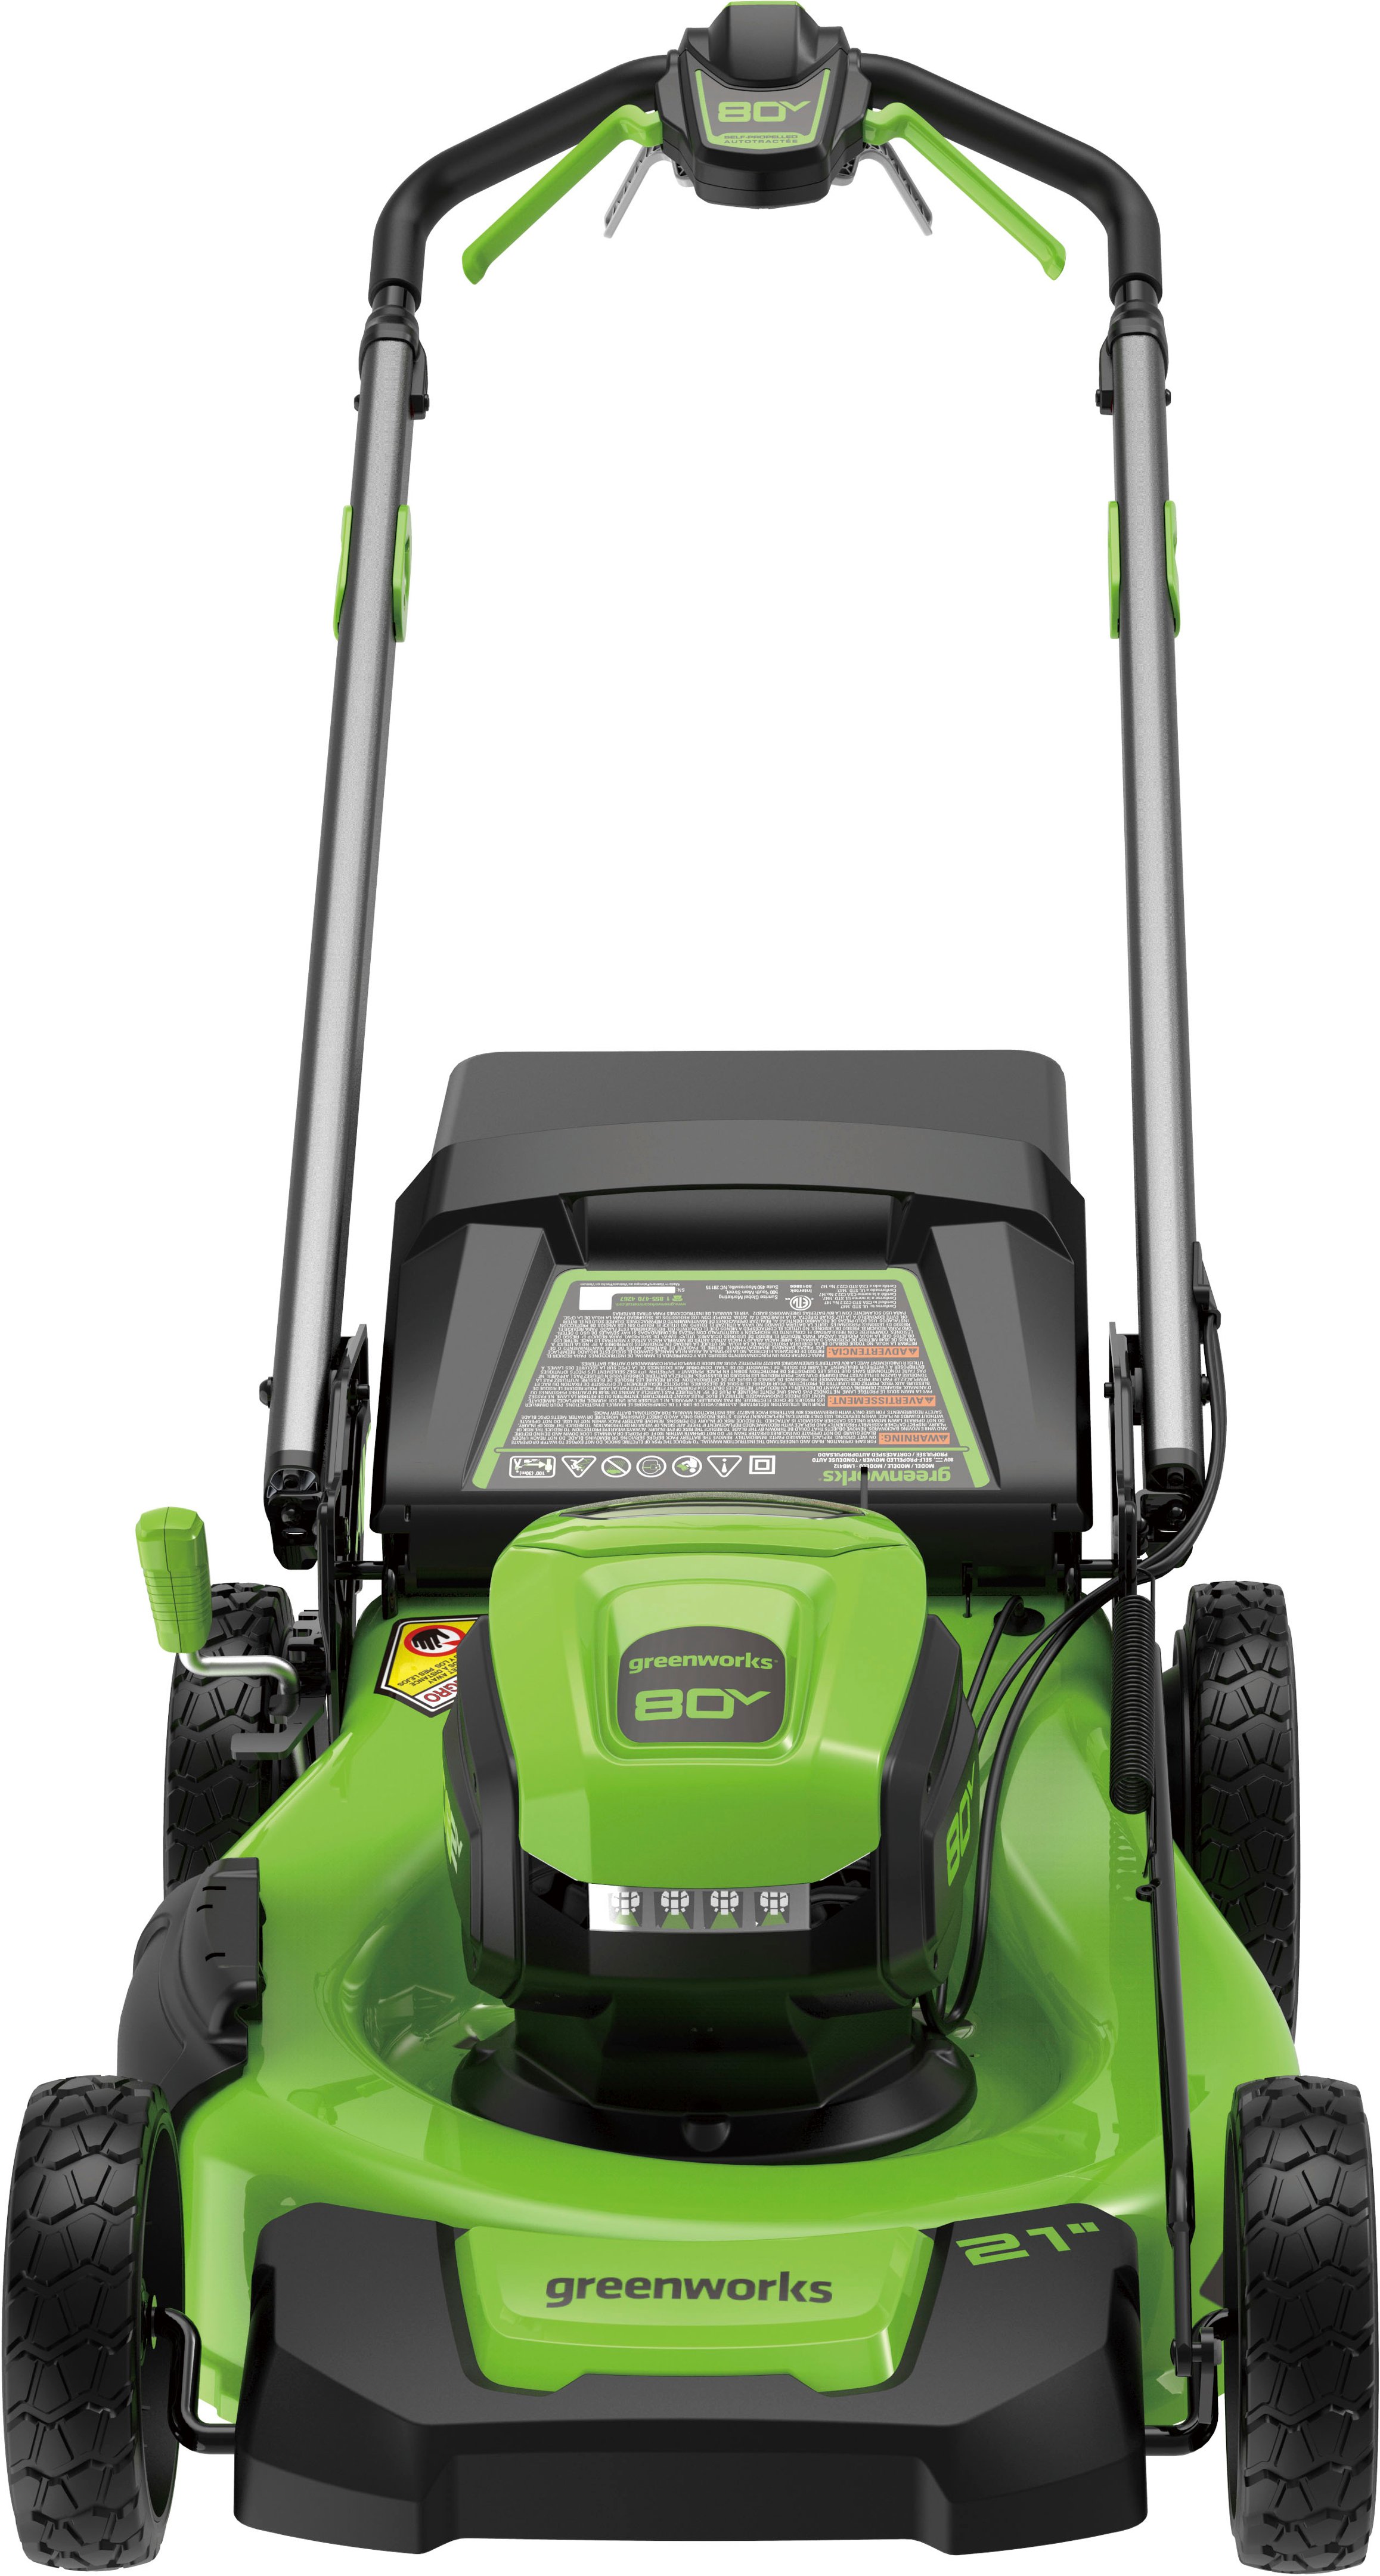 Left View: Greenworks - 80 Volt 21-Inch Self-Propelled Lawn Mower (1 x 4.0Ah Battery and 1 x Charger) - Green